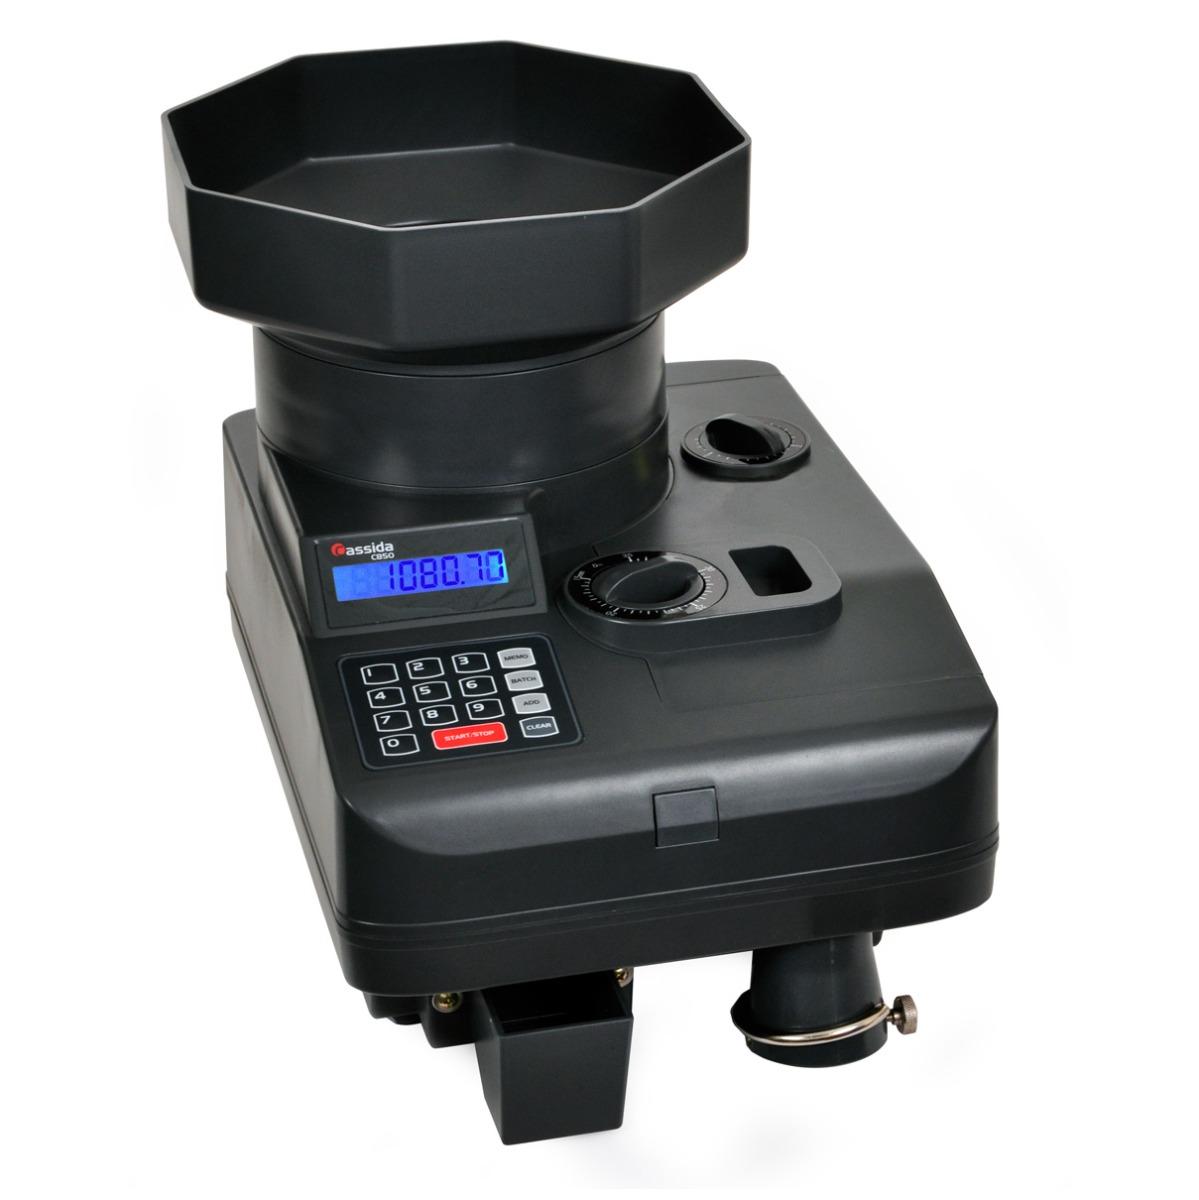 Cassida C850 Heavy-Duty Coin Counter/Off Sorter Front View